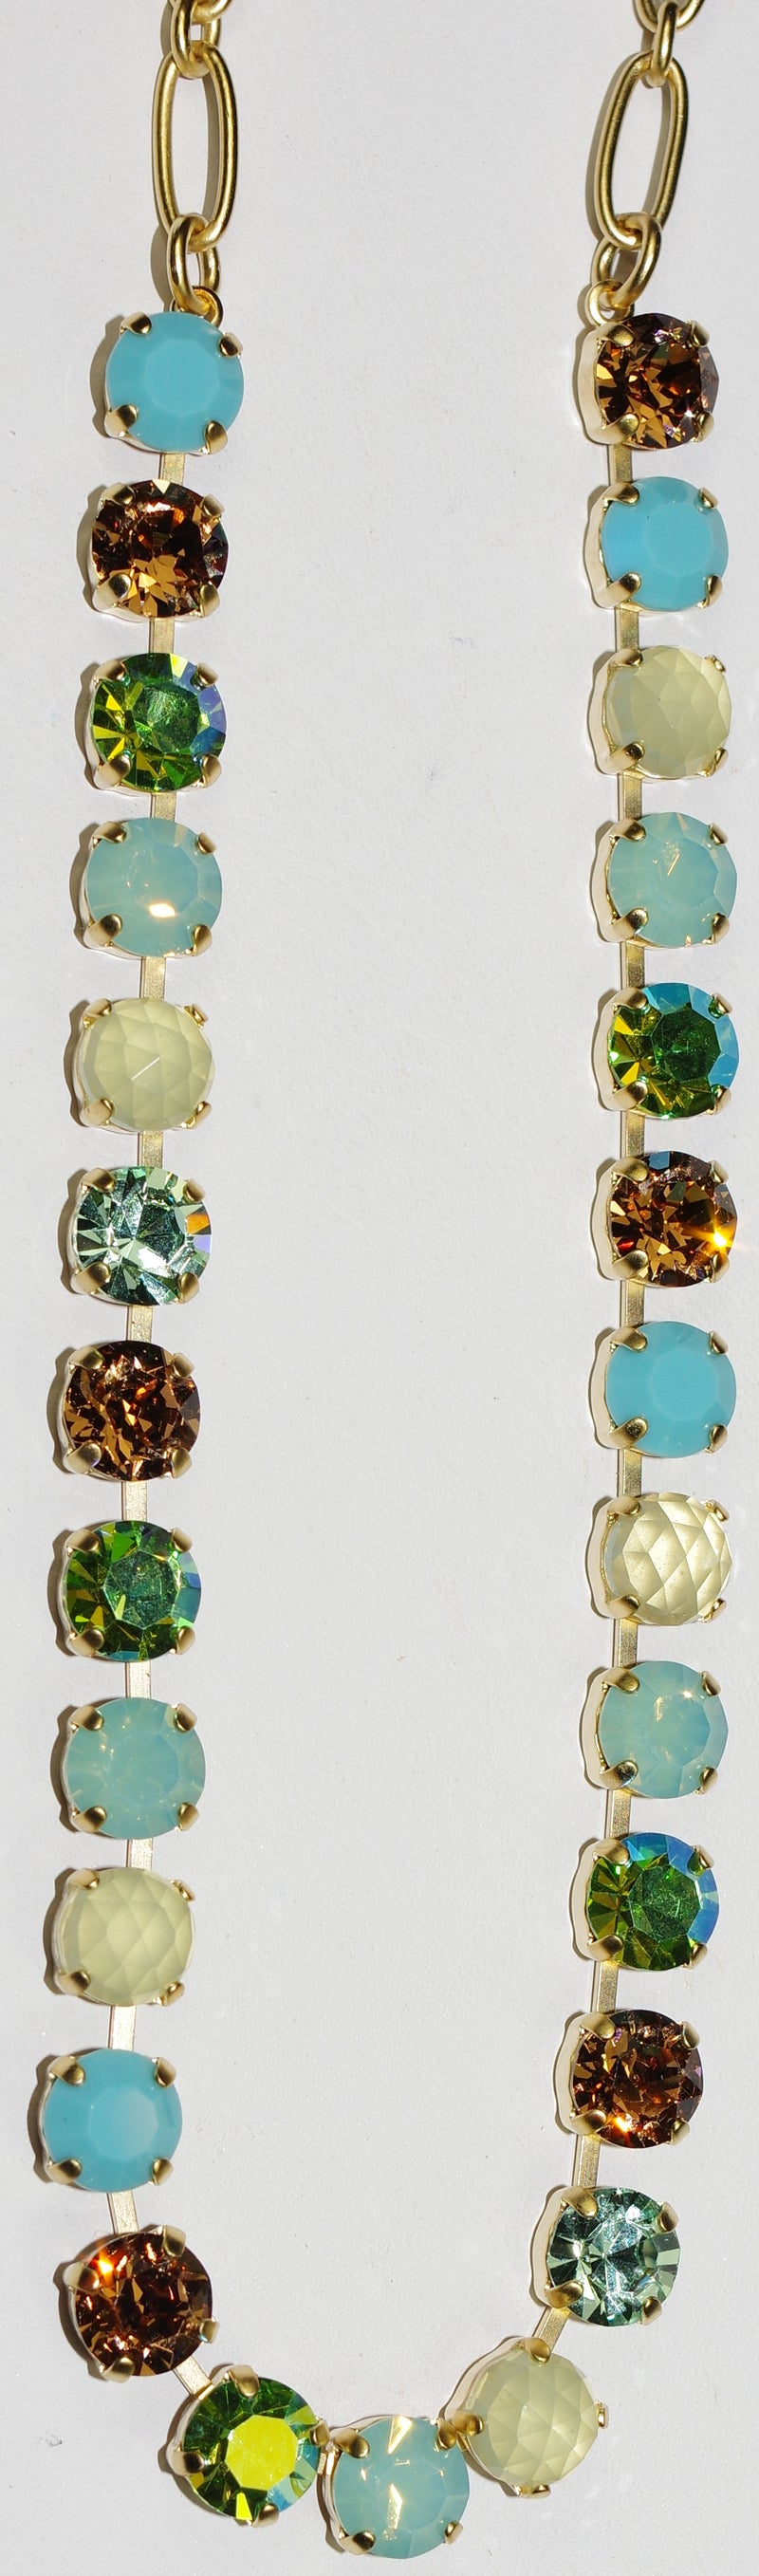 MARIANA NECKLACE BETTE RISING SUN: turq, amber, green, blue 1/4" stones in yellow gold setting, 17" adjustable chain